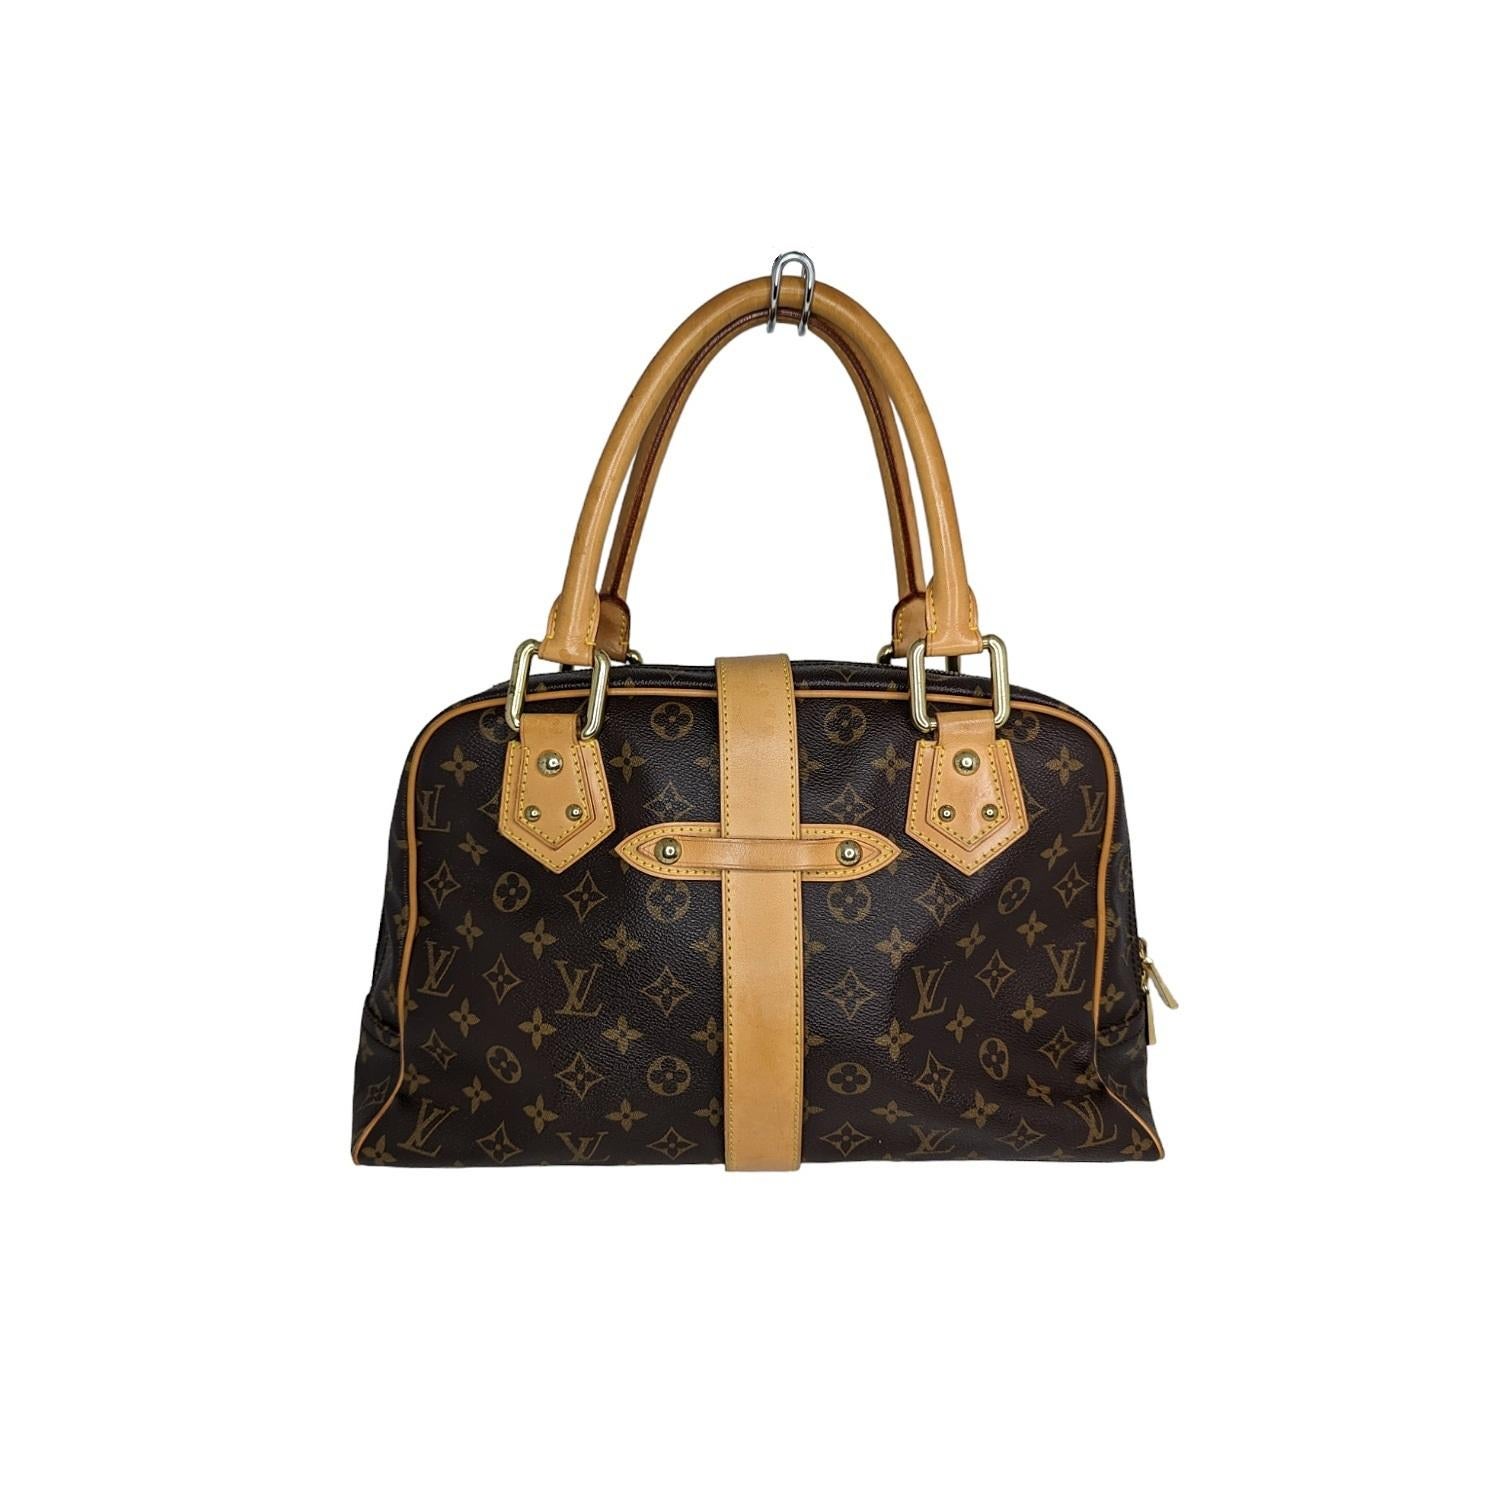 Brown and tan monogram coated canvas Louis Vuitton Manhattan GM with brass hardware, dual rolled top handles, tan vachetta trim, dual flap pockets with push-lock closures at front face, tan Alcantara lining, single interior flat pocket and two-way